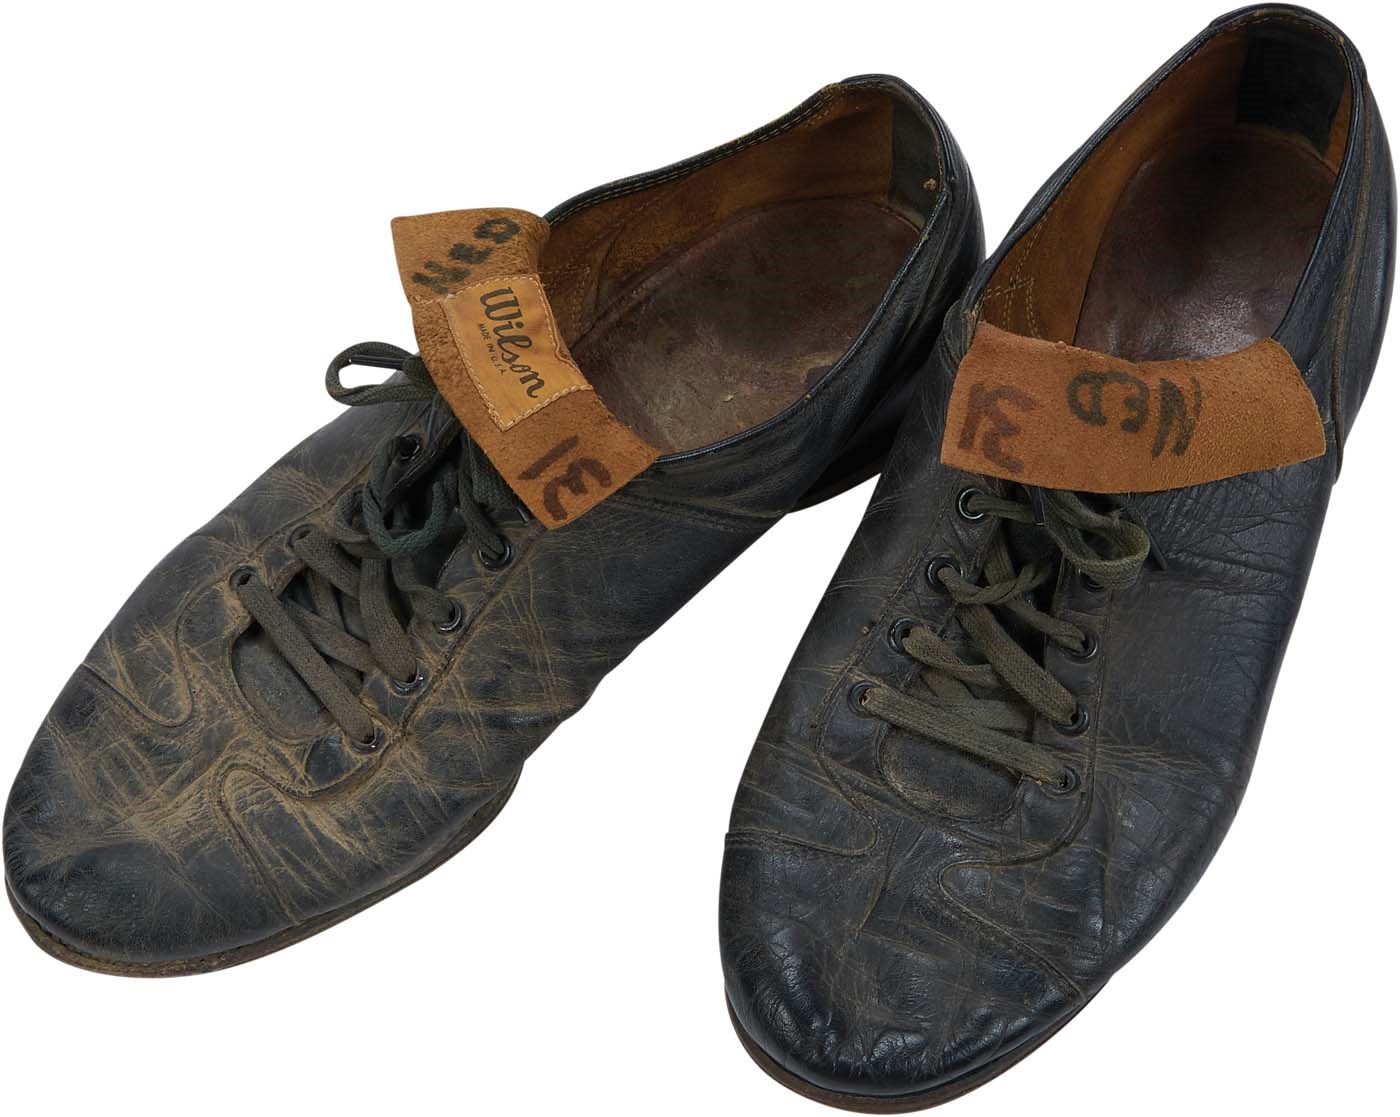 - 1950s Ned Garver Game Used Spikes